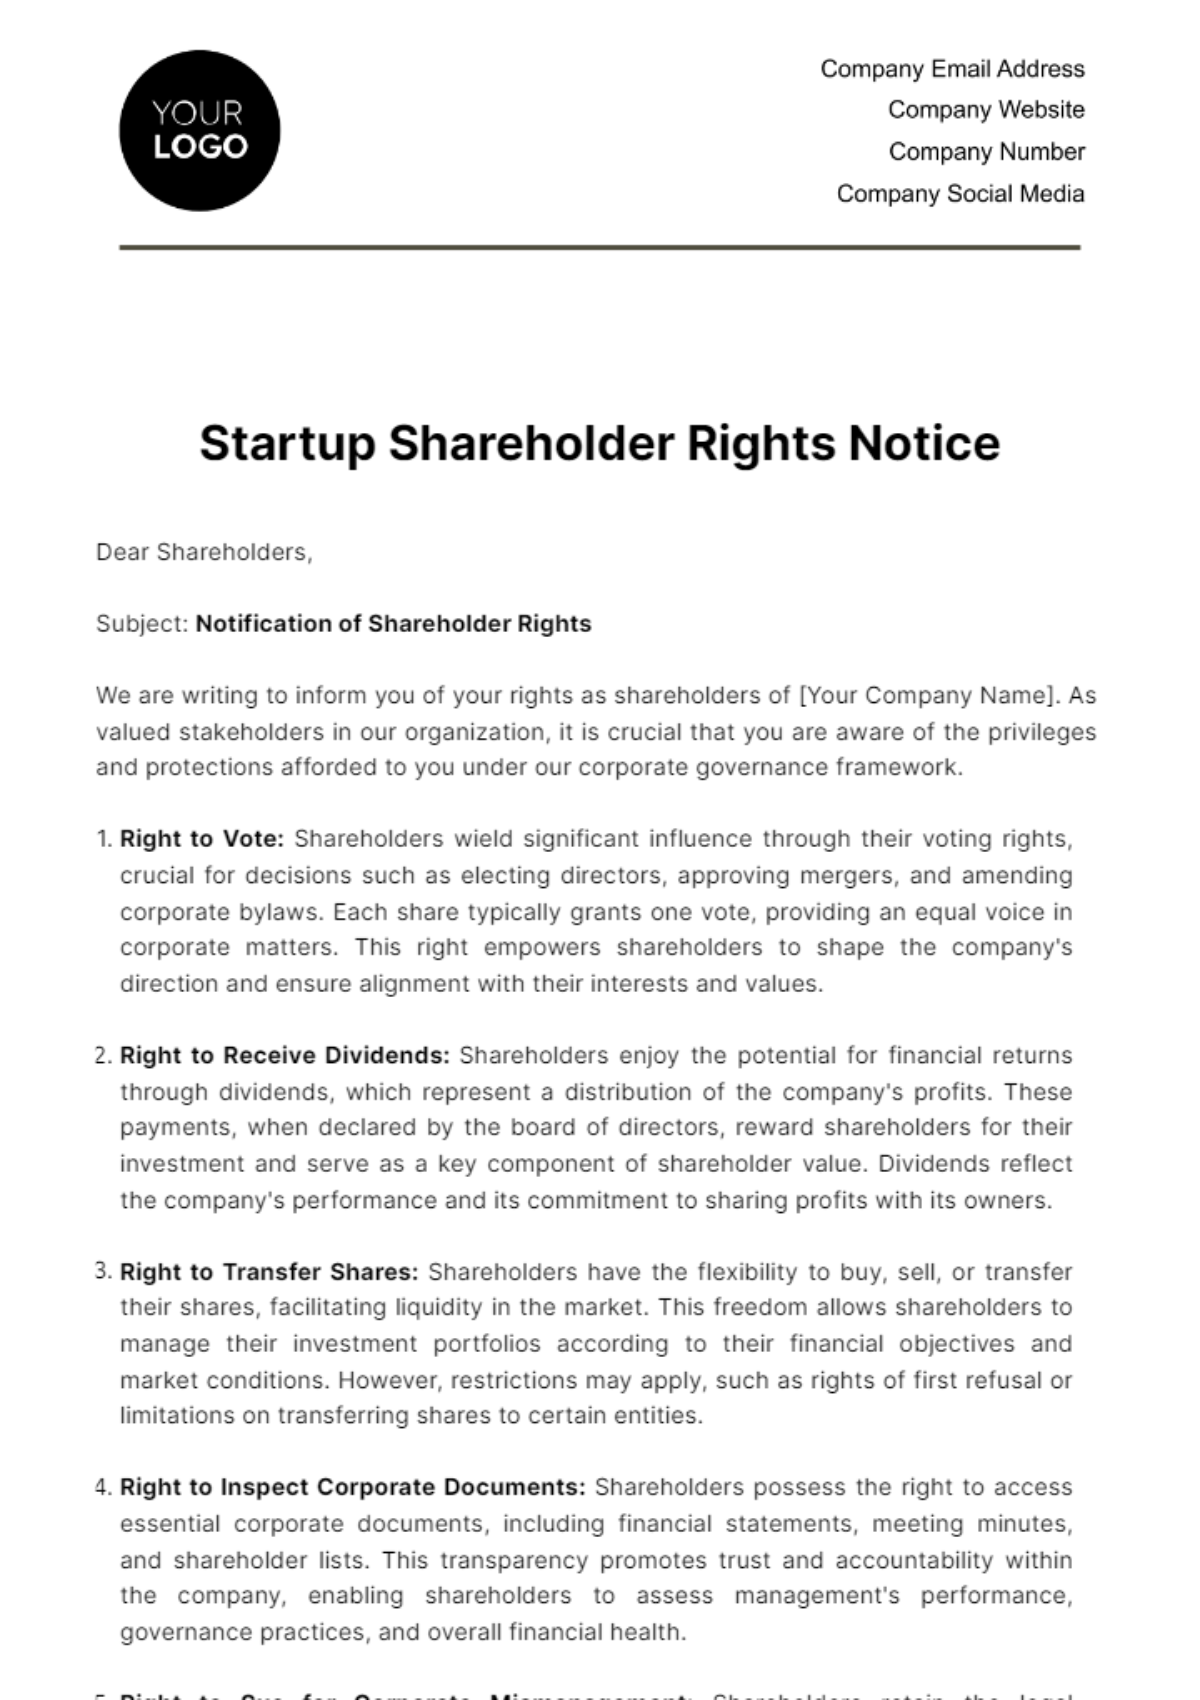 Startup Shareholder Rights Notice Template